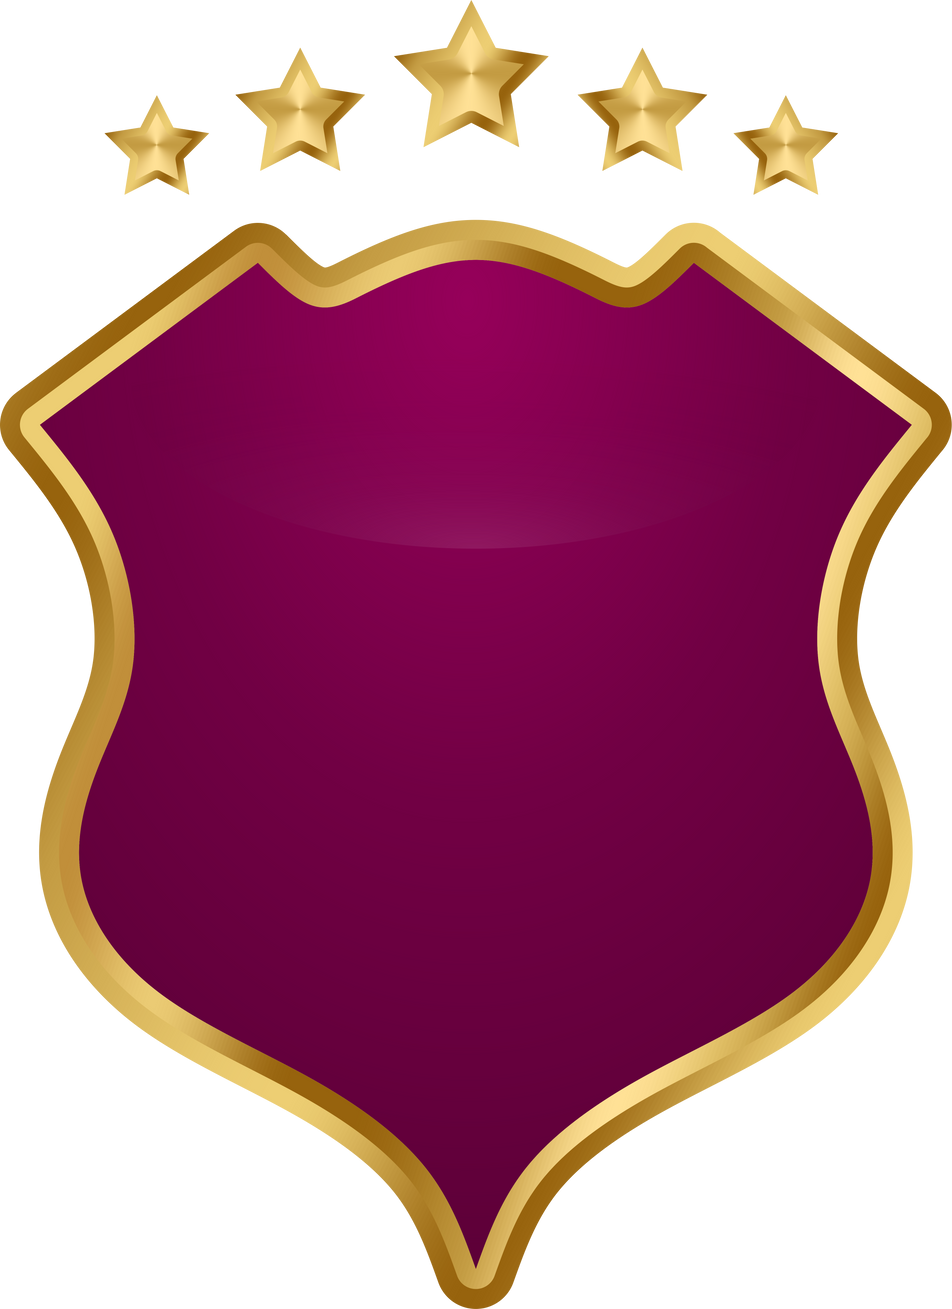 Shield emblem with five stars plum and golden border